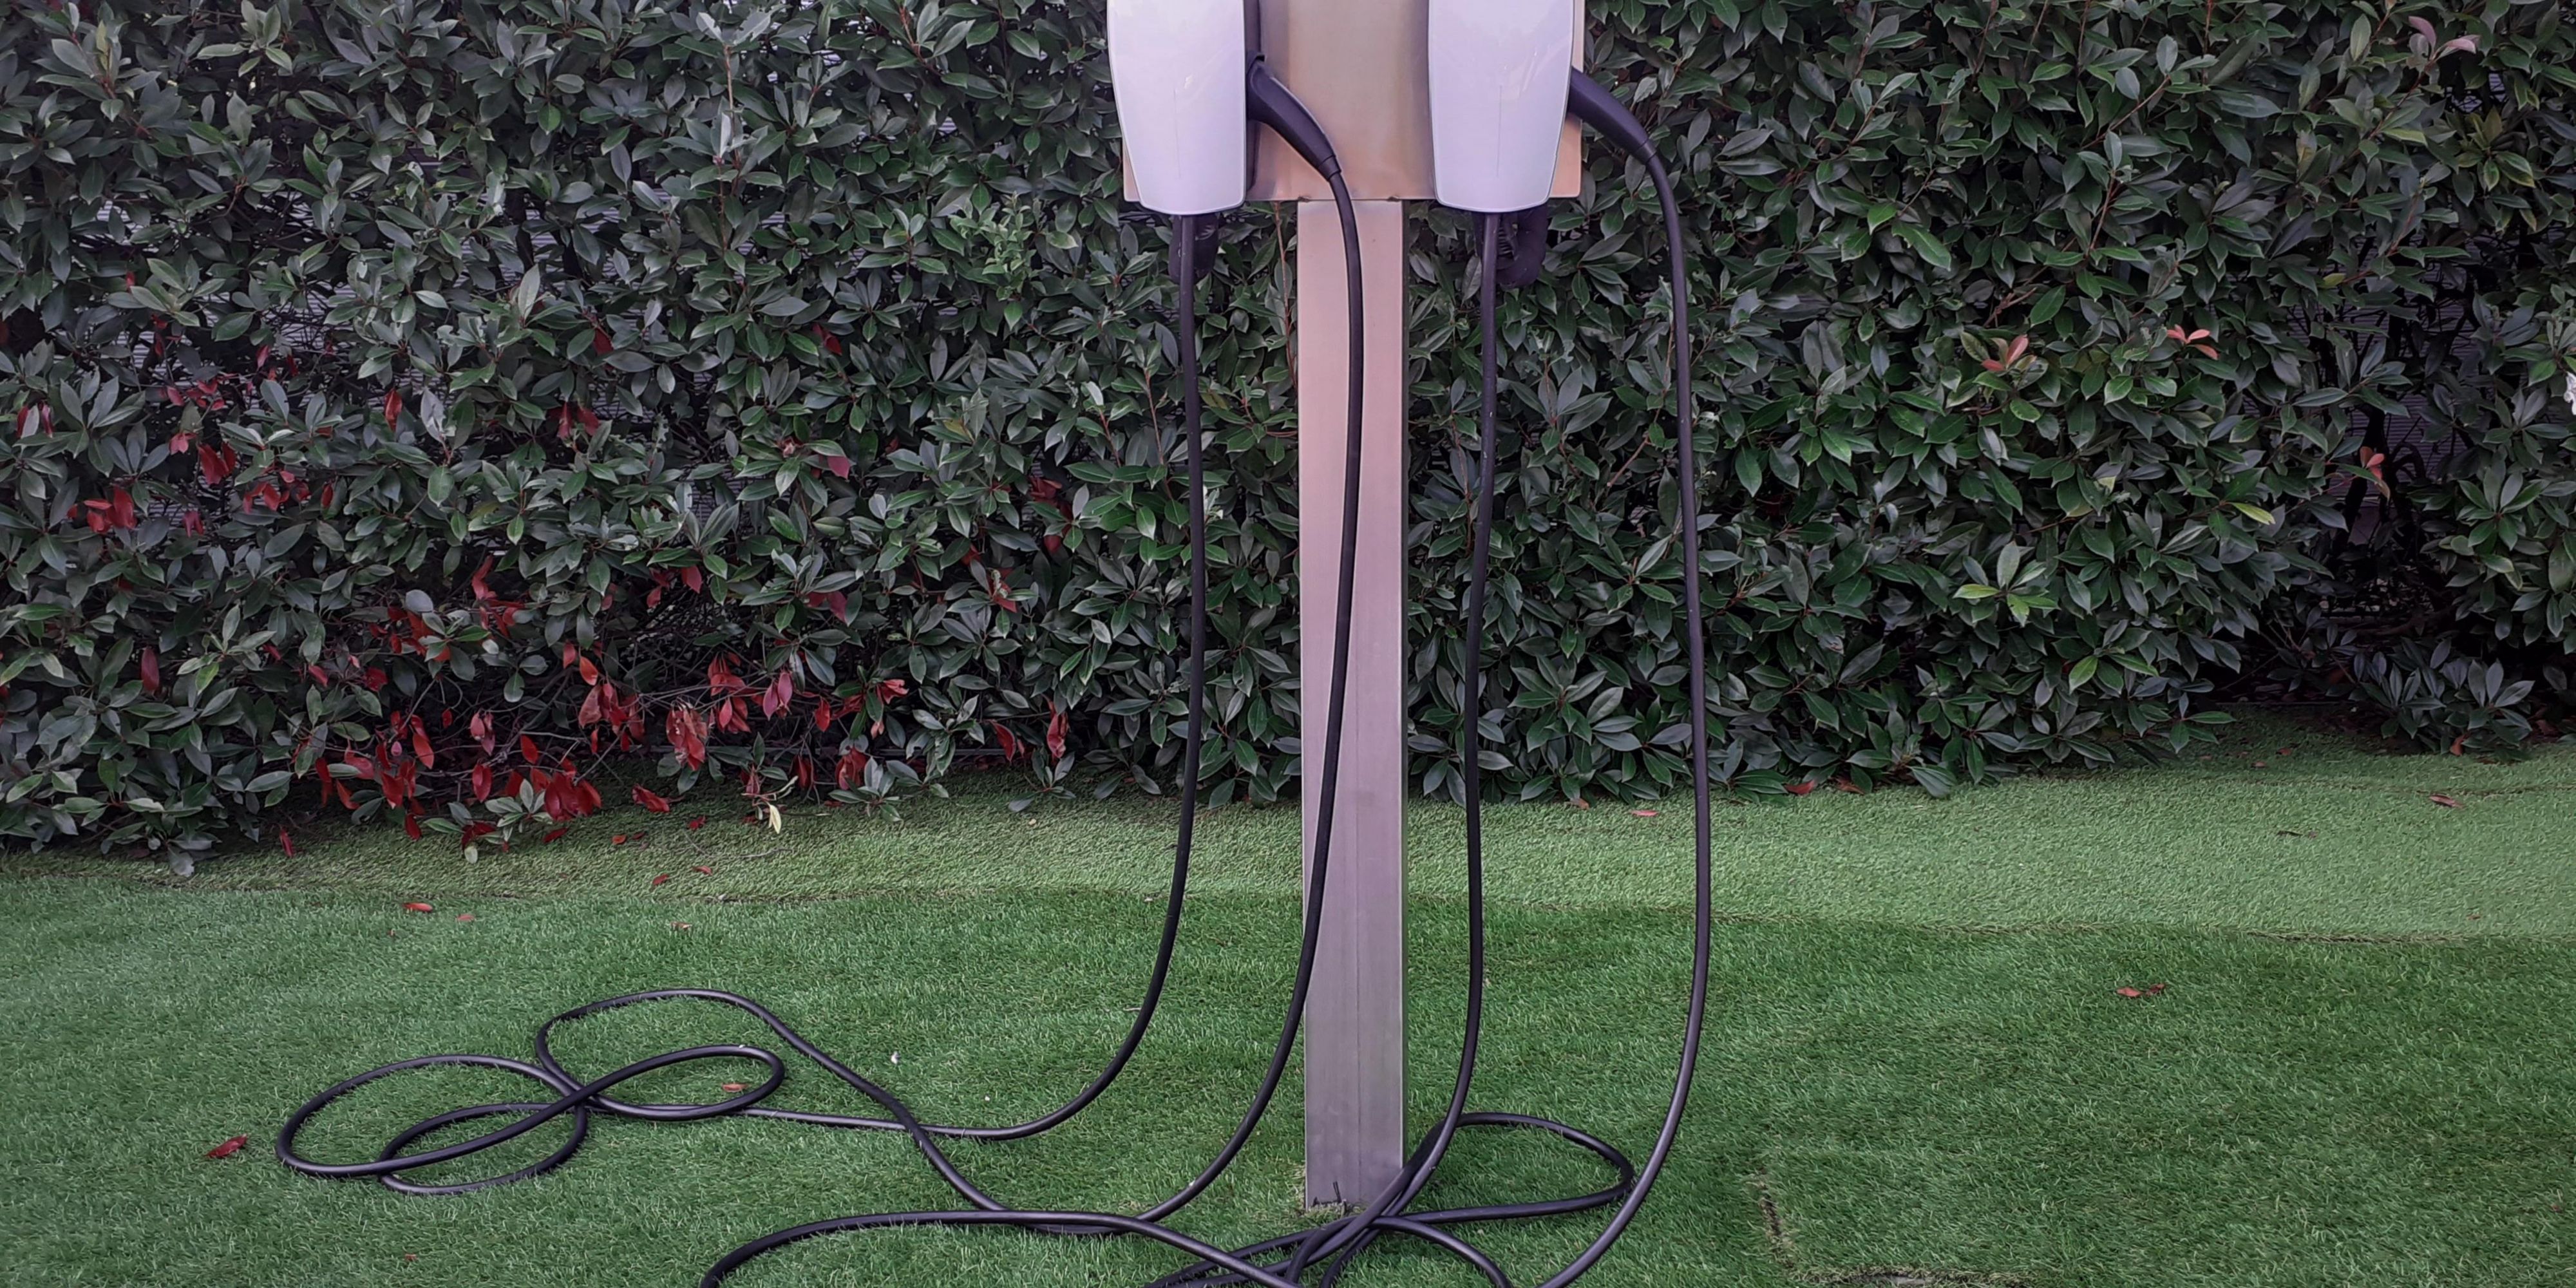 We offer two electric vehicle charging stations, located in our car parking, suitable for all types of cars: one Tesla connector and one universal. Please contact hotel reception for information and charging cost.